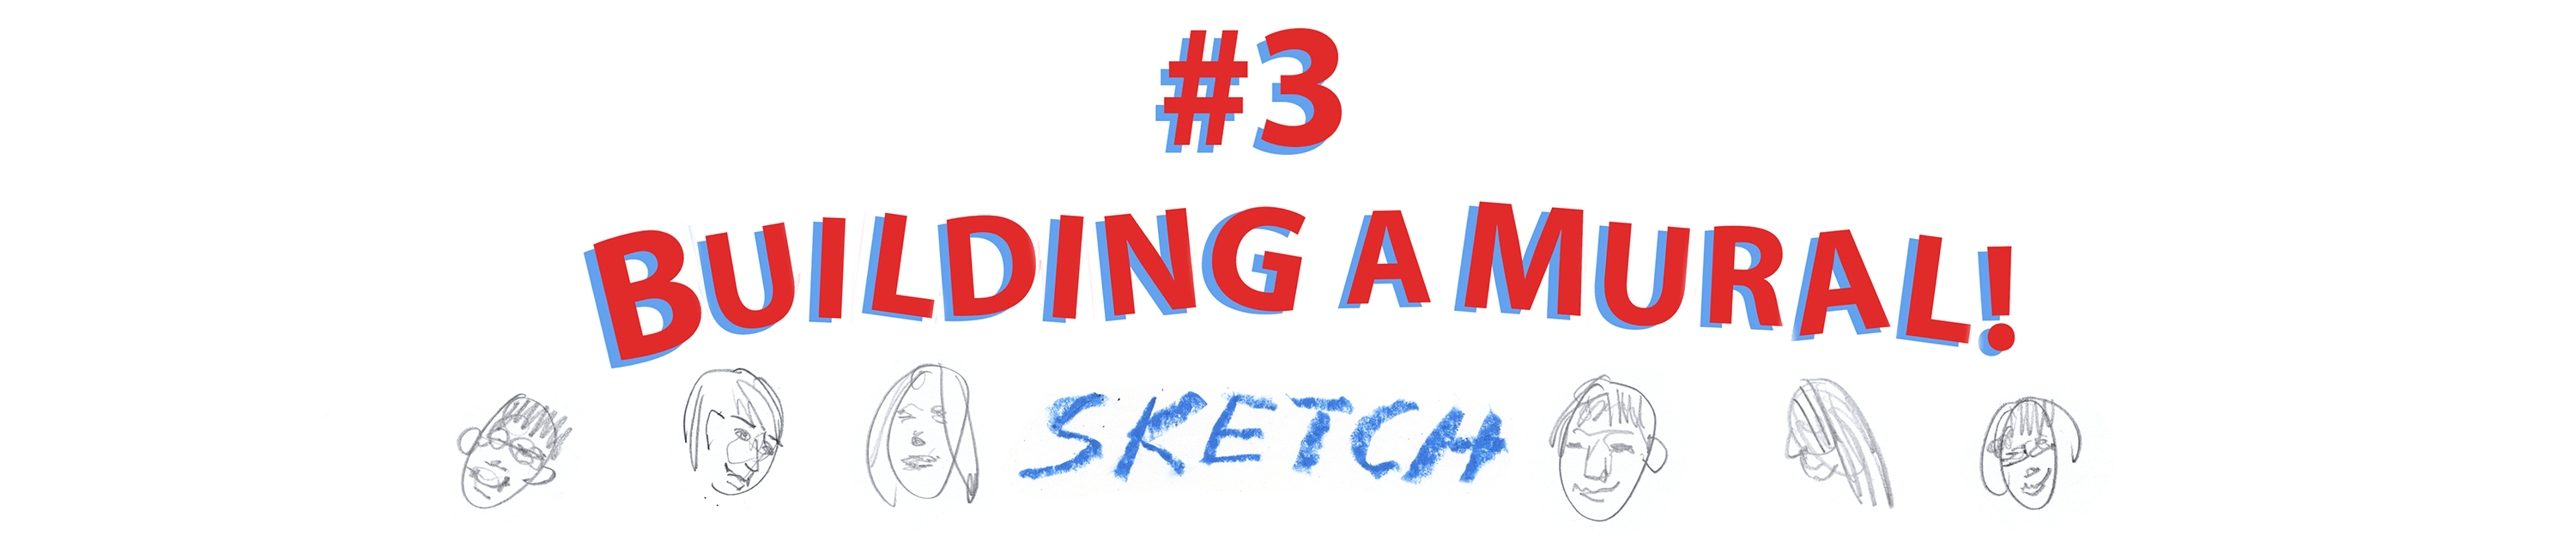 #3 Building a Mural! The Sketch